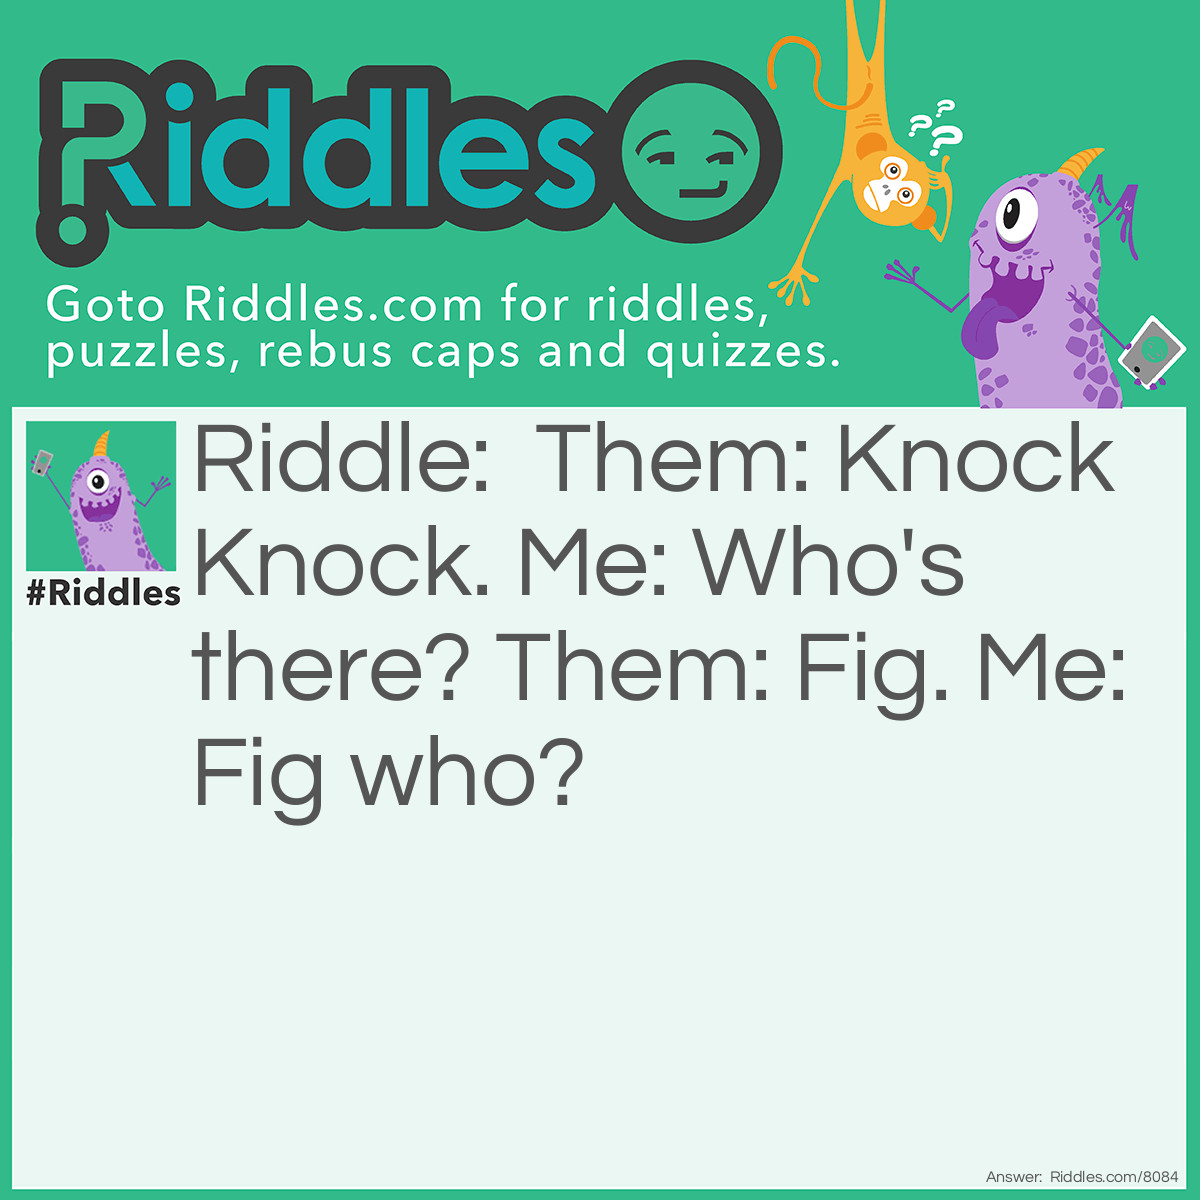 Riddle: Them: Knock Knock. Me: Who's there? Them: Fig. Me: Fig who? Answer: Them: Figure it out yourself.